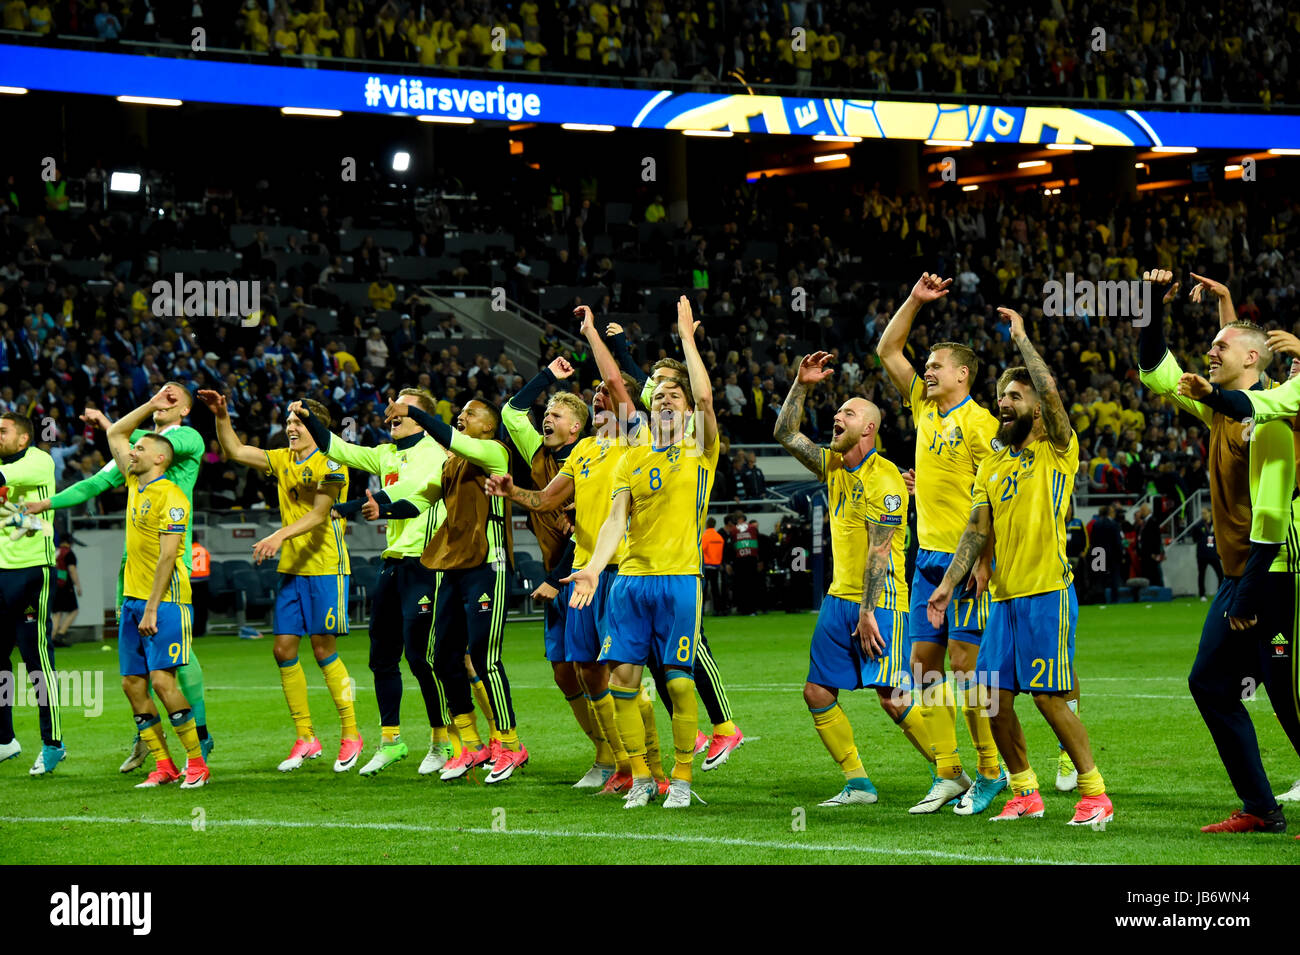 Stockholm, Sweden. 9th june, 2017. Sweden 8 Albin Ekdahl and Teammates celebrate after victory in the FIFA World Cup™ Qualifiers game between Sweden and France. Credit: Bror Persson/Frilansfotograferna/Alamy Live News Stock Photo